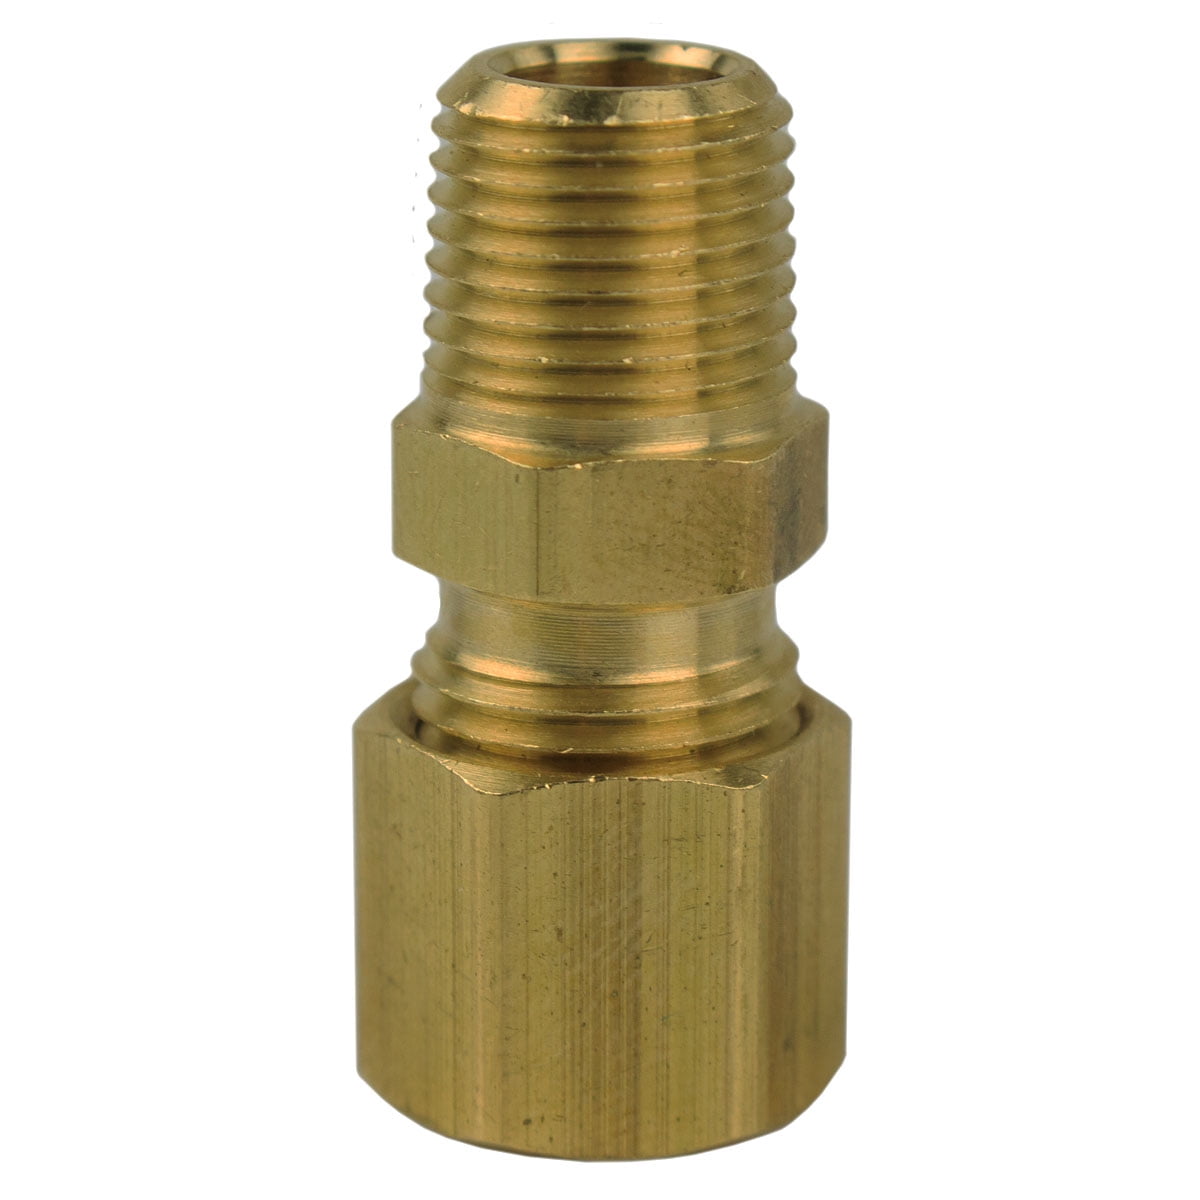 1/4" Tube OD Compression to 1/8" Male NPT Fitting Adapter Connector 